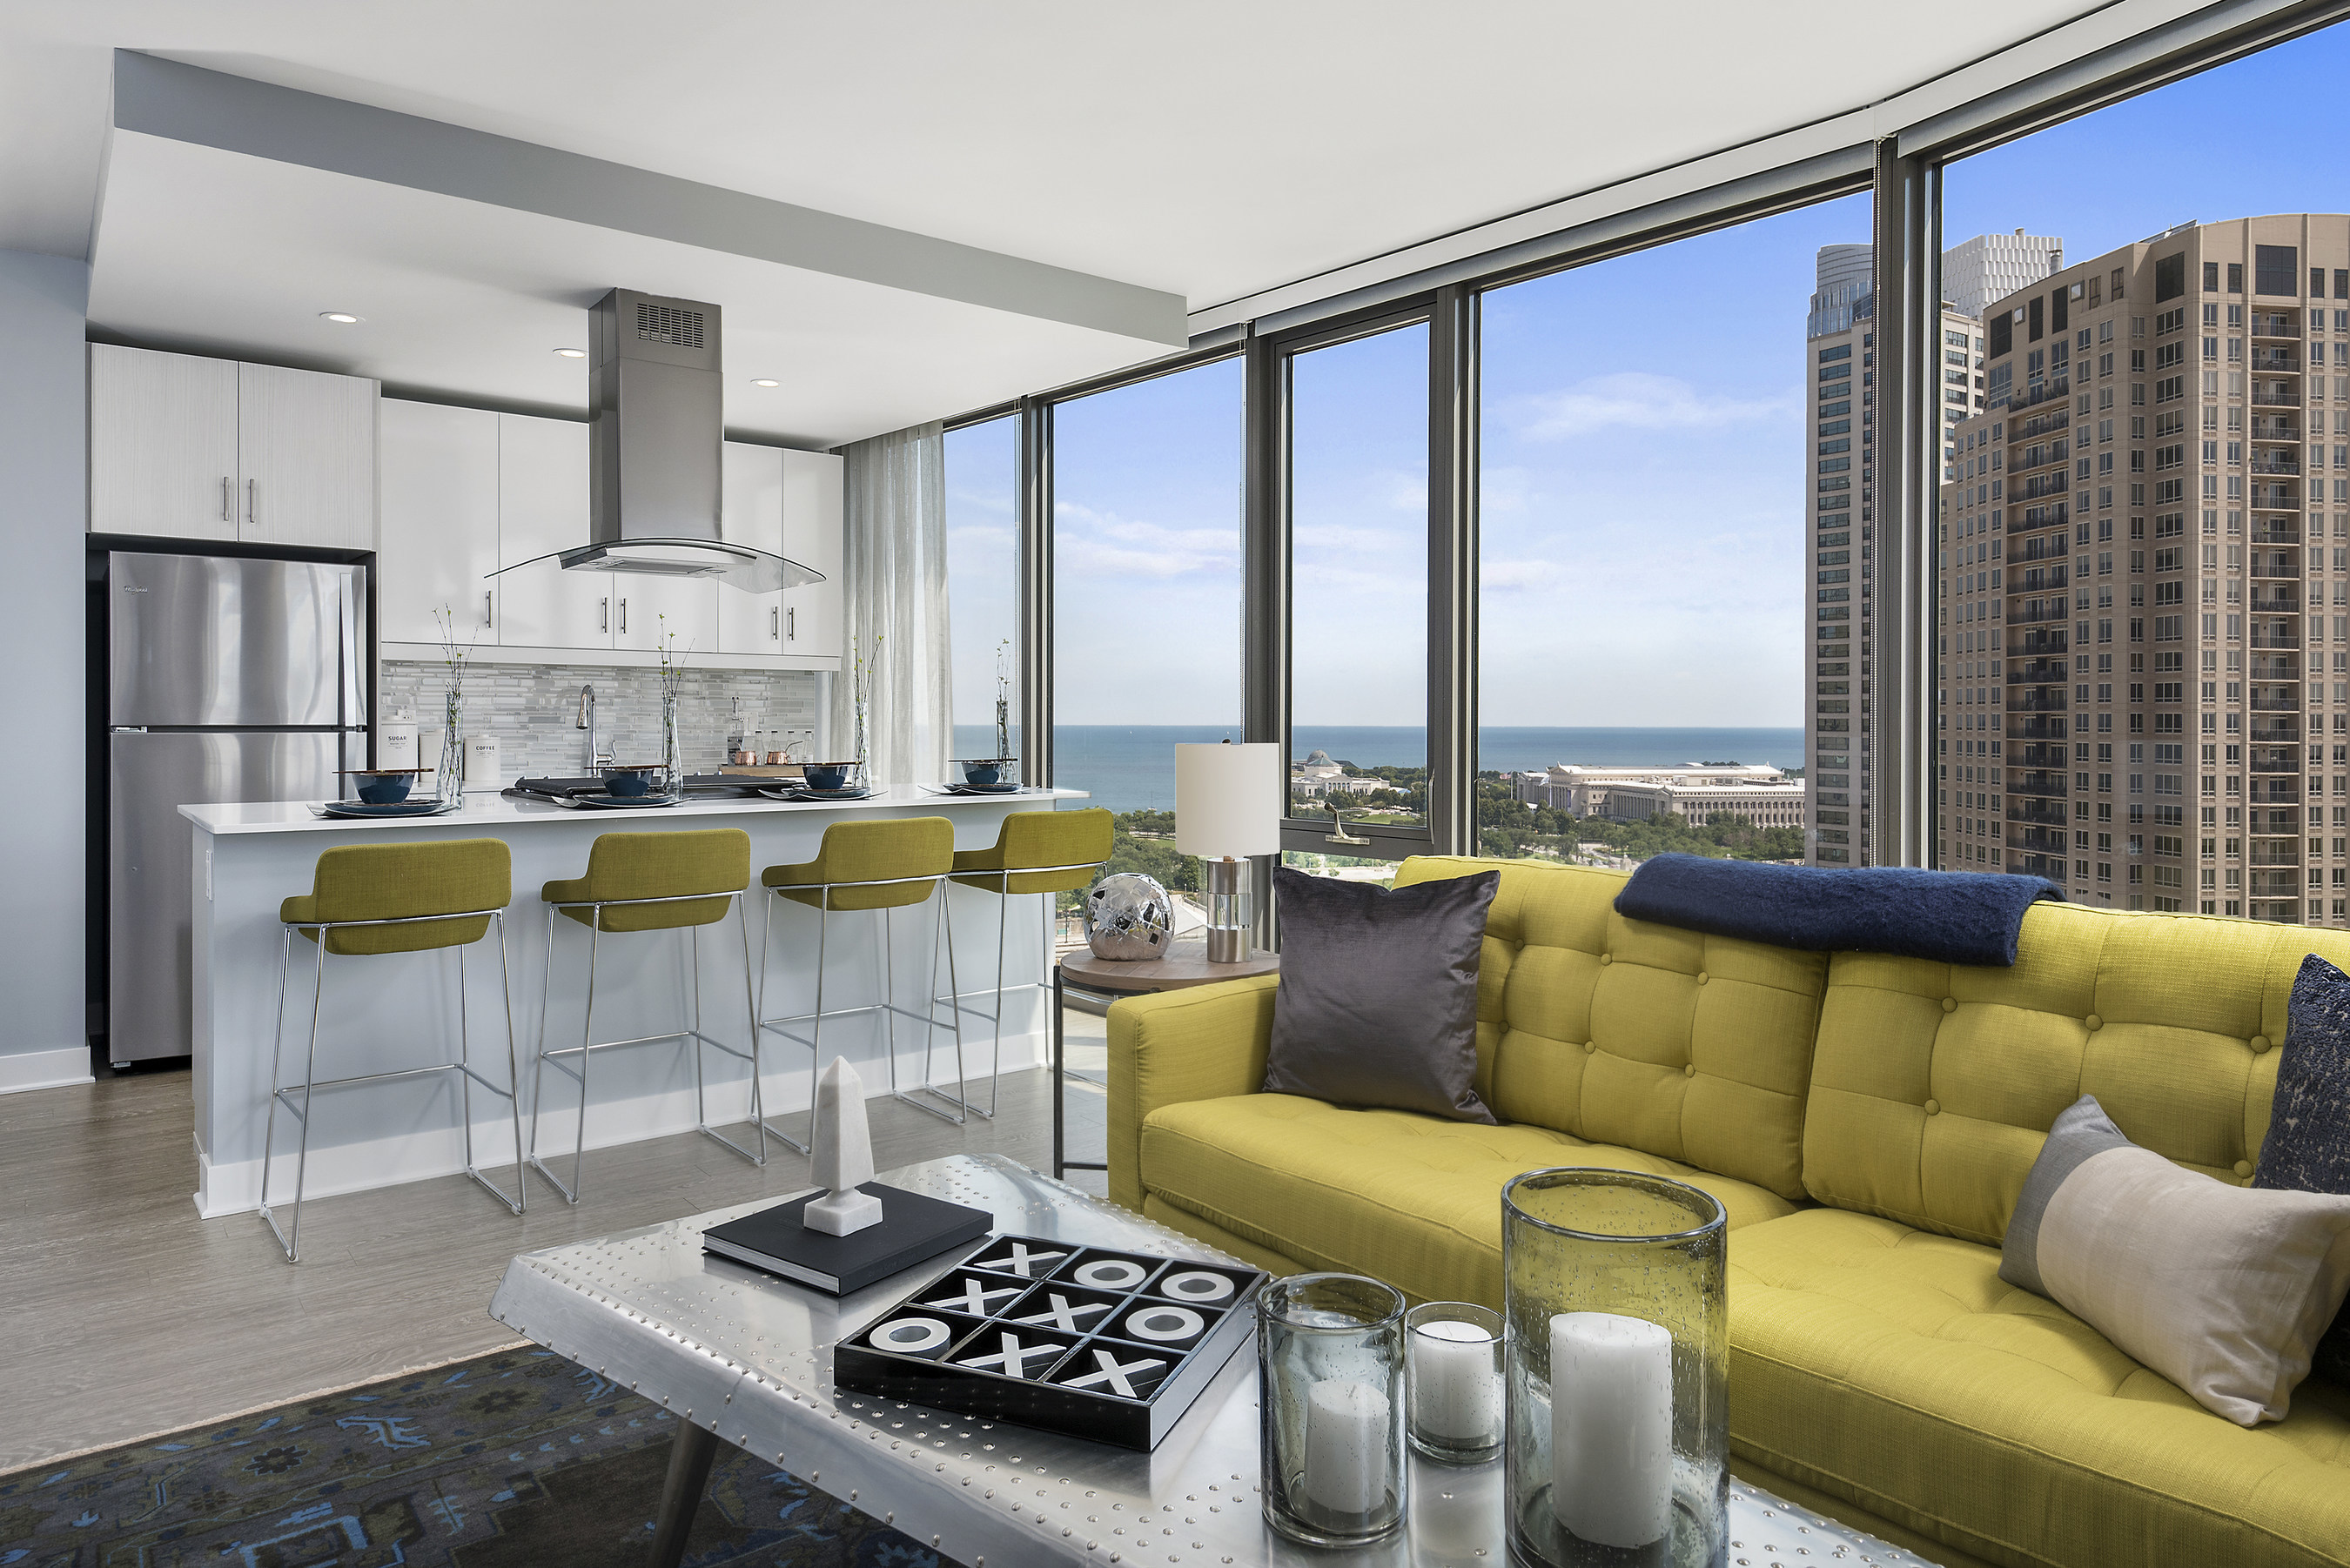 New 41-story luxury apartment tower 1001 South State features innovative and tech-friendly amenities in Chicago's energized South Loop neighborhood.